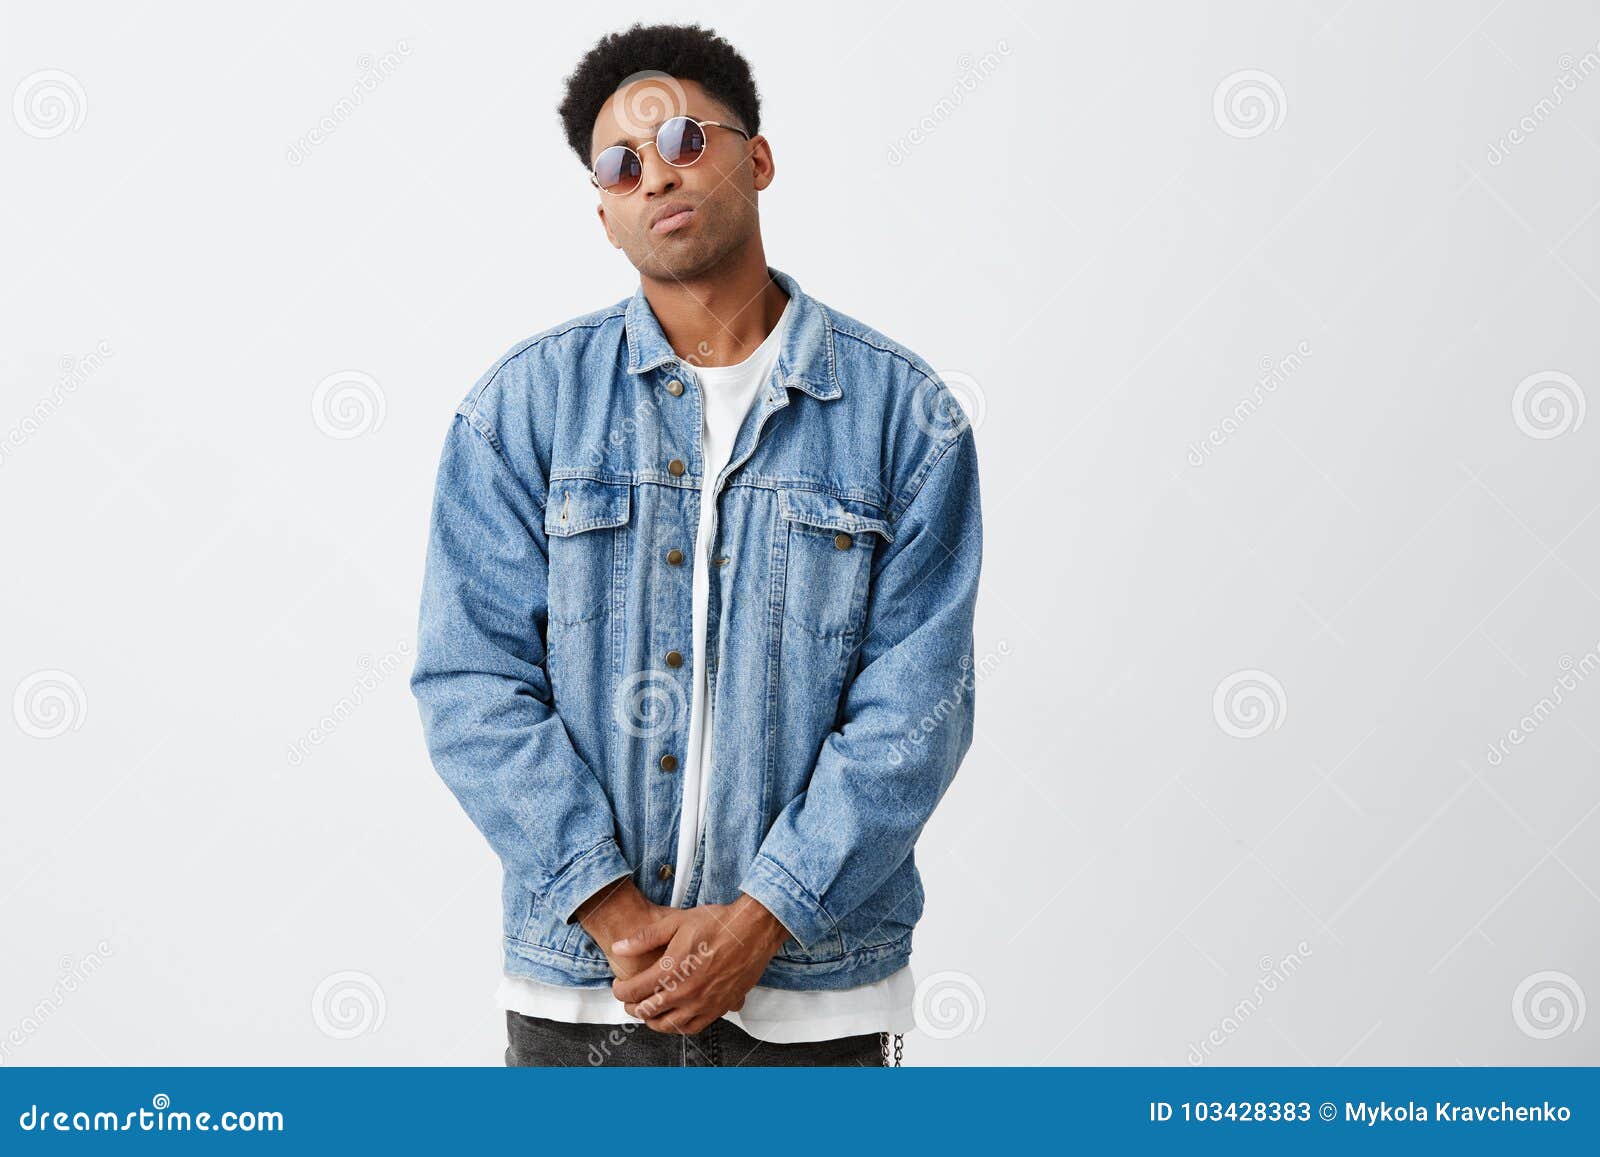 Portrait of Young Beautiful Dark-skinned Man with Afro Hairstyle in Casual  Fashionable Clothes and Tan Glasses Holding Stock Image - Image of black,  background: 103428383